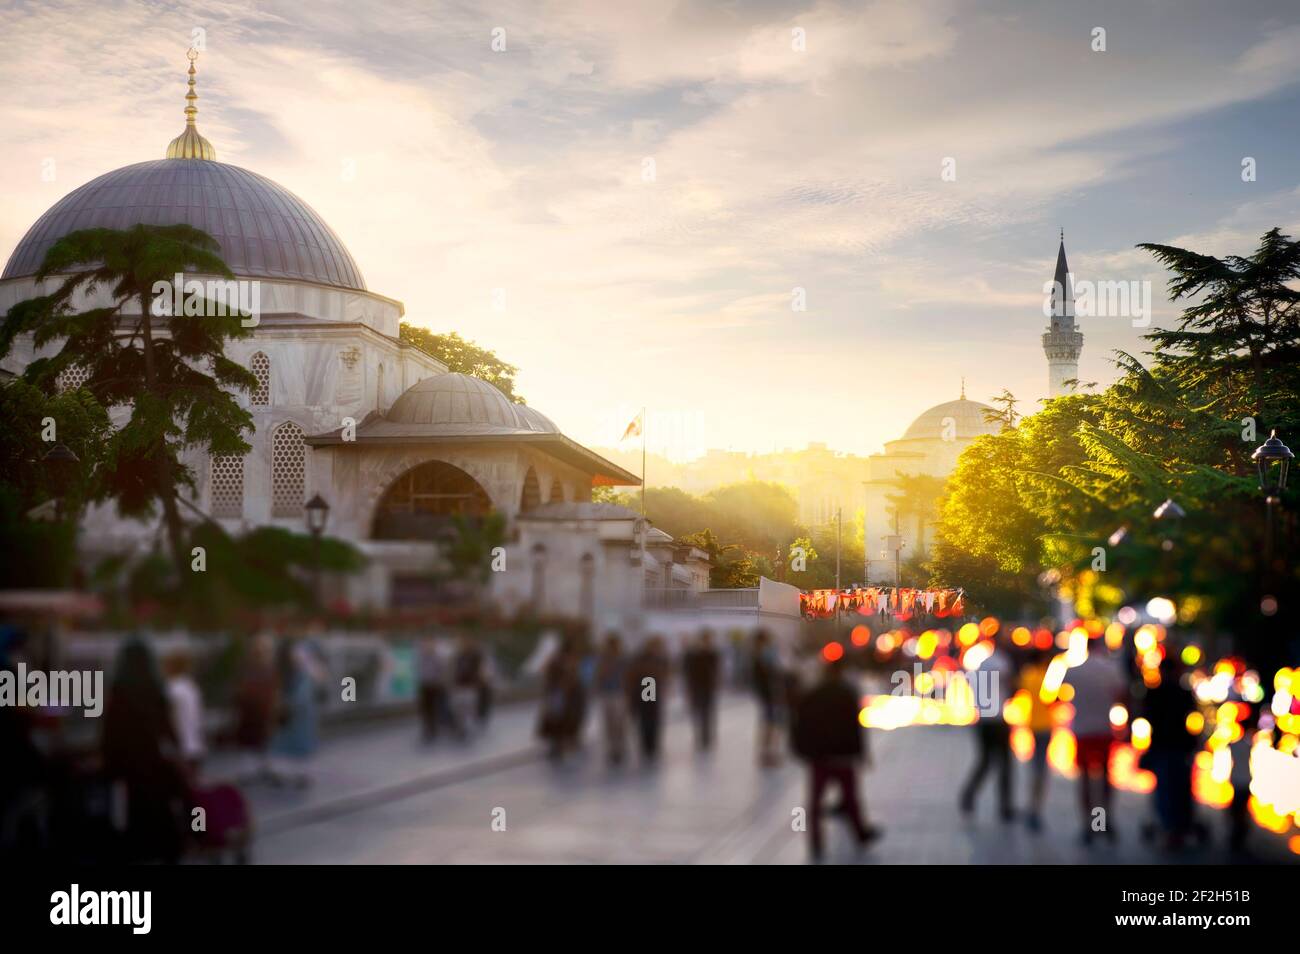 Turkish mosque at sunset in Istanbul, Turkey Stock Photo